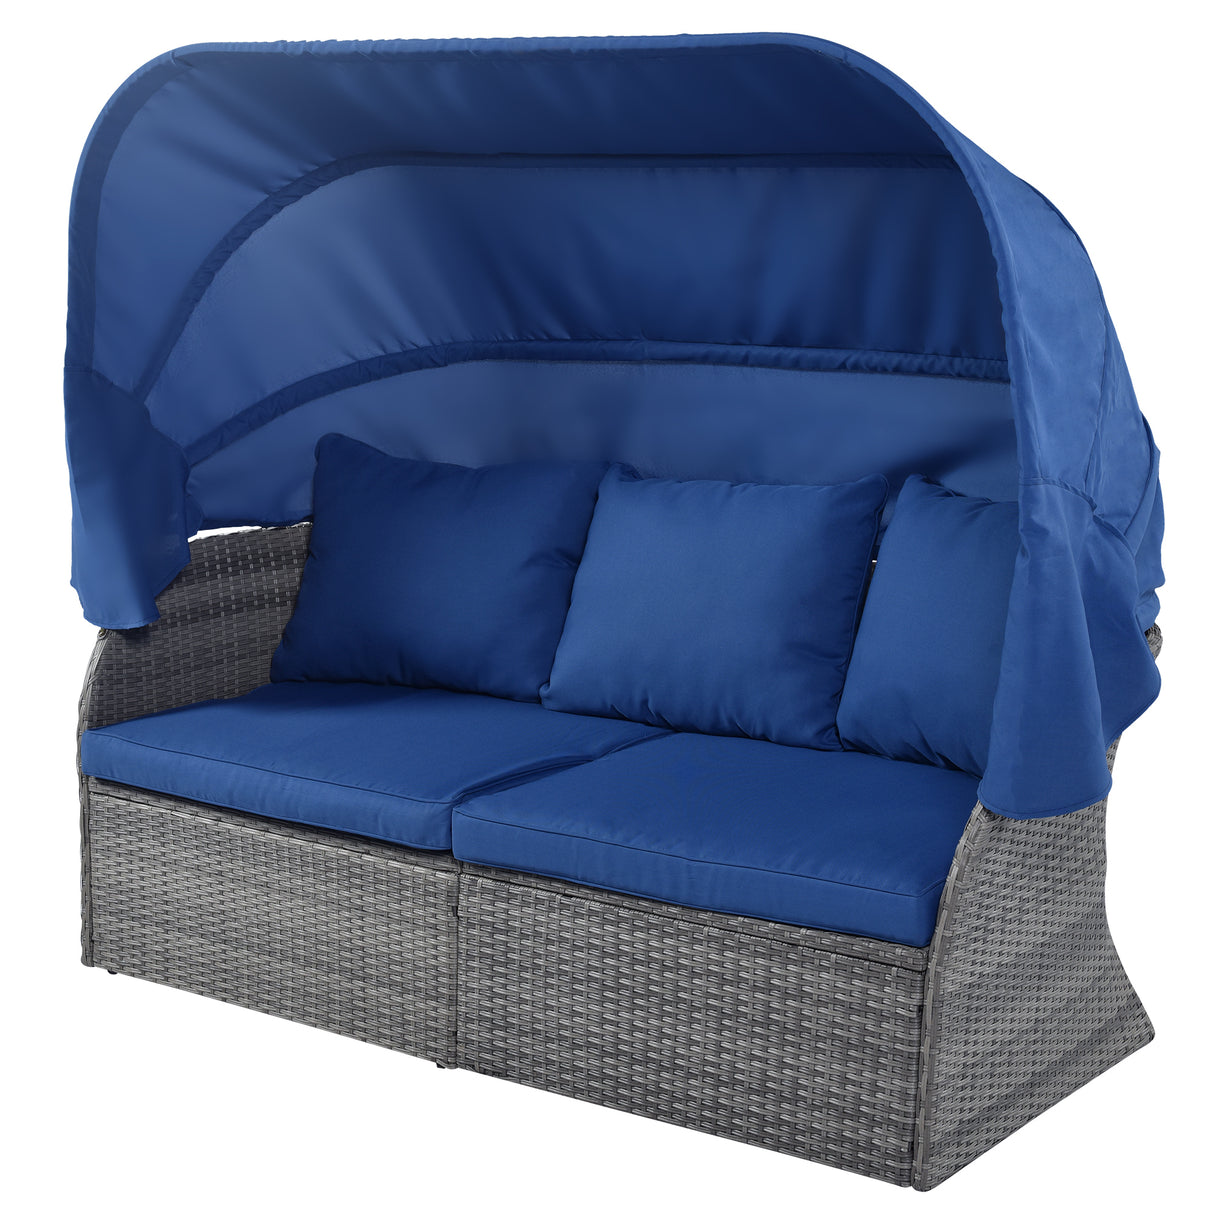 U_STYLE Outdoor Patio Furniture Set Daybed Sunbed with Retractable Canopy Conversation Set Wicker Furniture （As same as WY000281AAV）